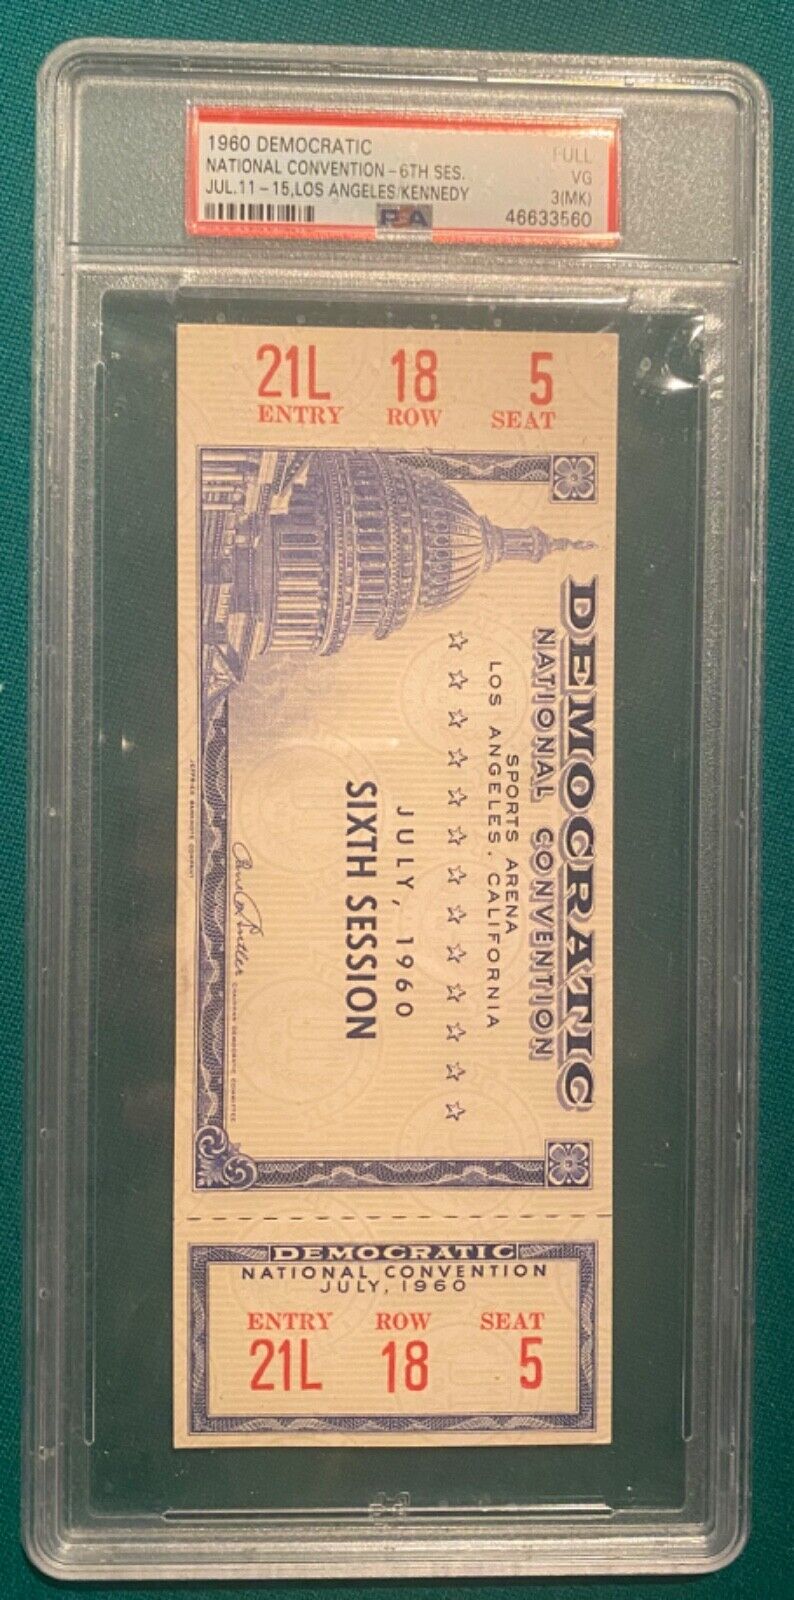 PSA graded 1960 Democratic National Convention 6th session ticket